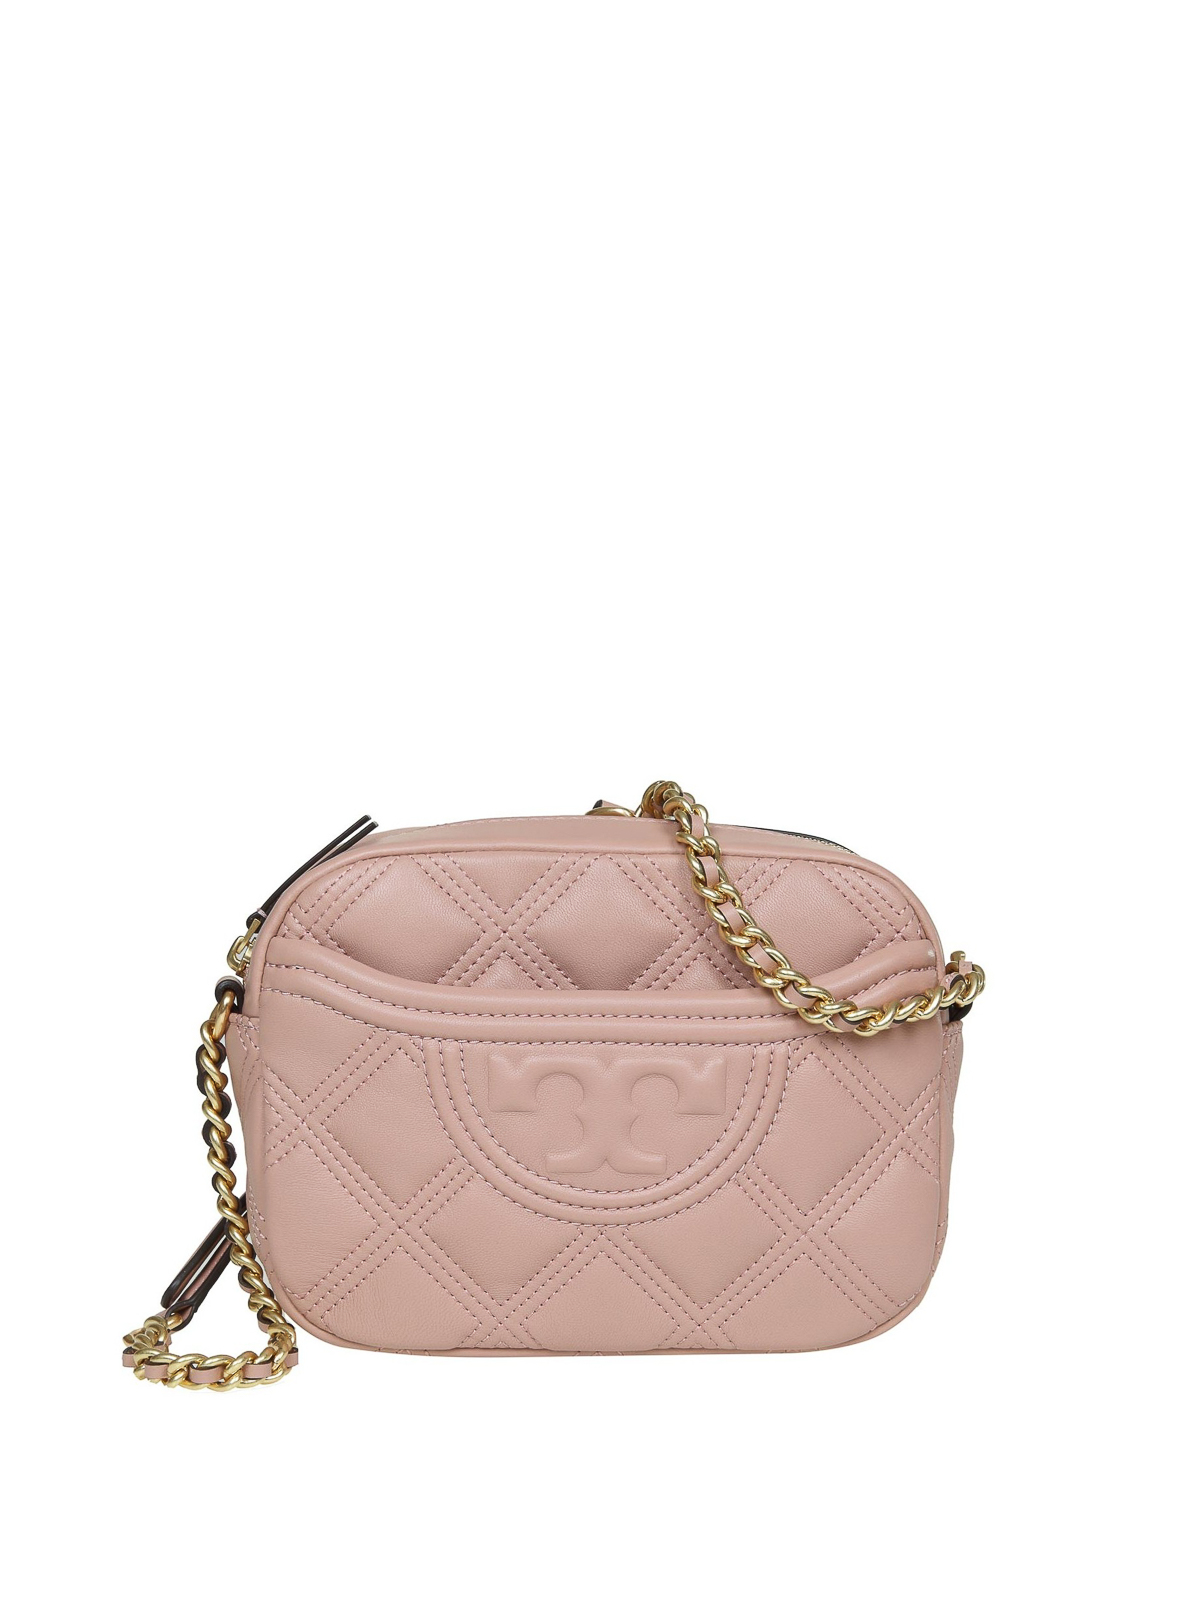 Cross body bags Tory Burch - Flaming quilted leather bag - 62091689